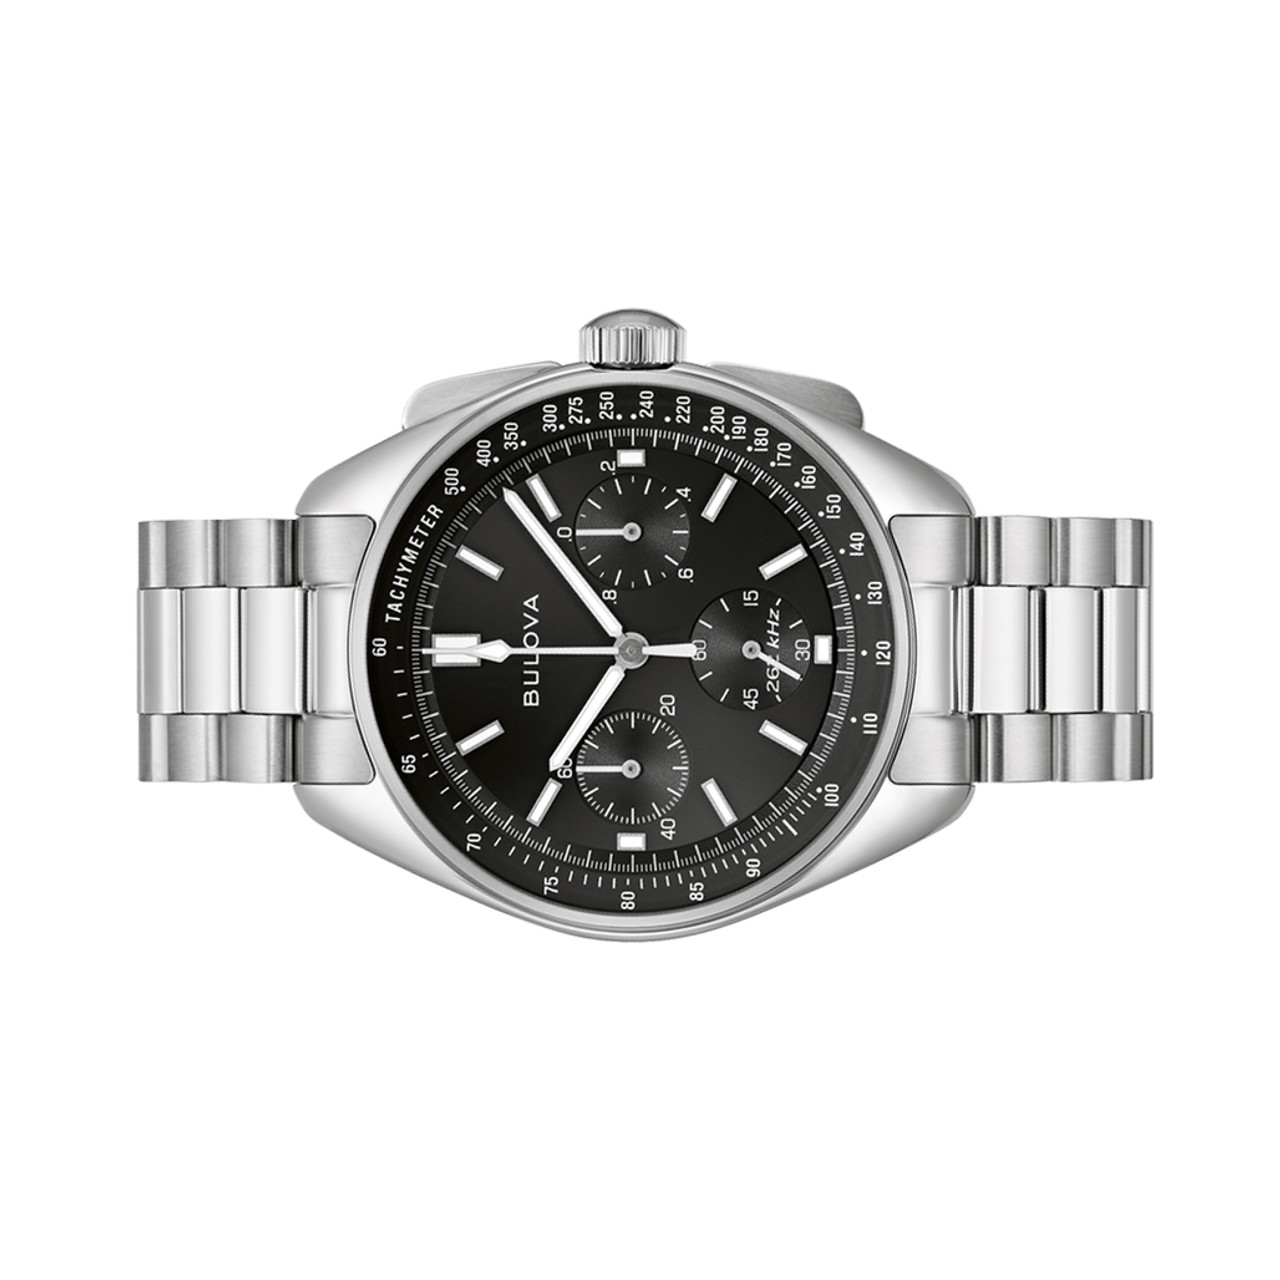 Bulova Lunar Pilot Chronograph 43.5mm with Black Dial and Stainless Steel  Bracelet #96K111